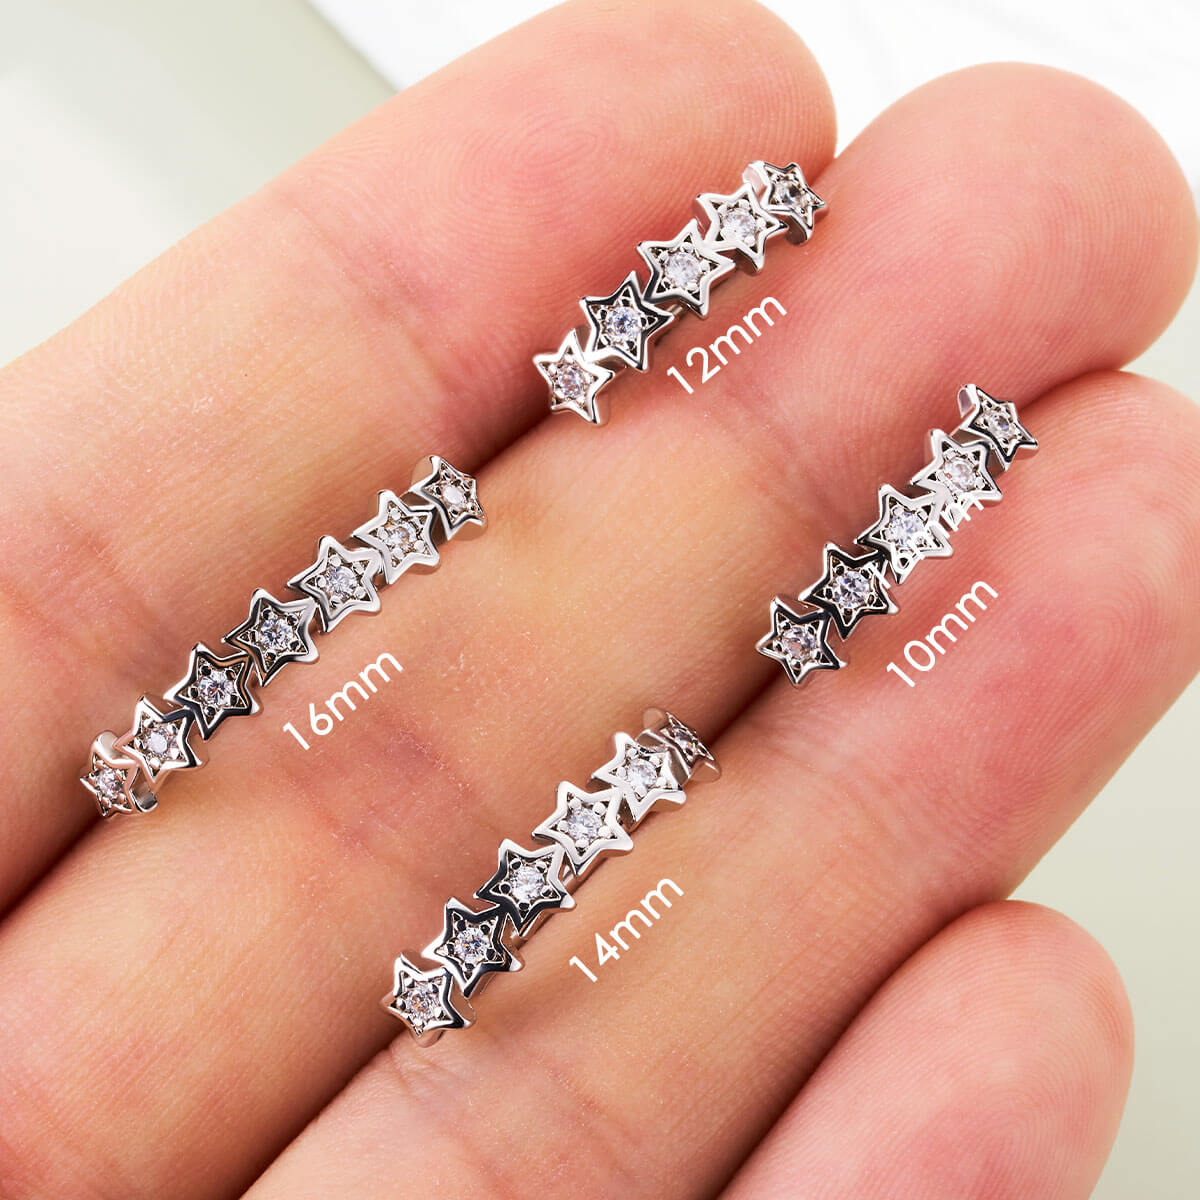 14mm star climber belly button ring